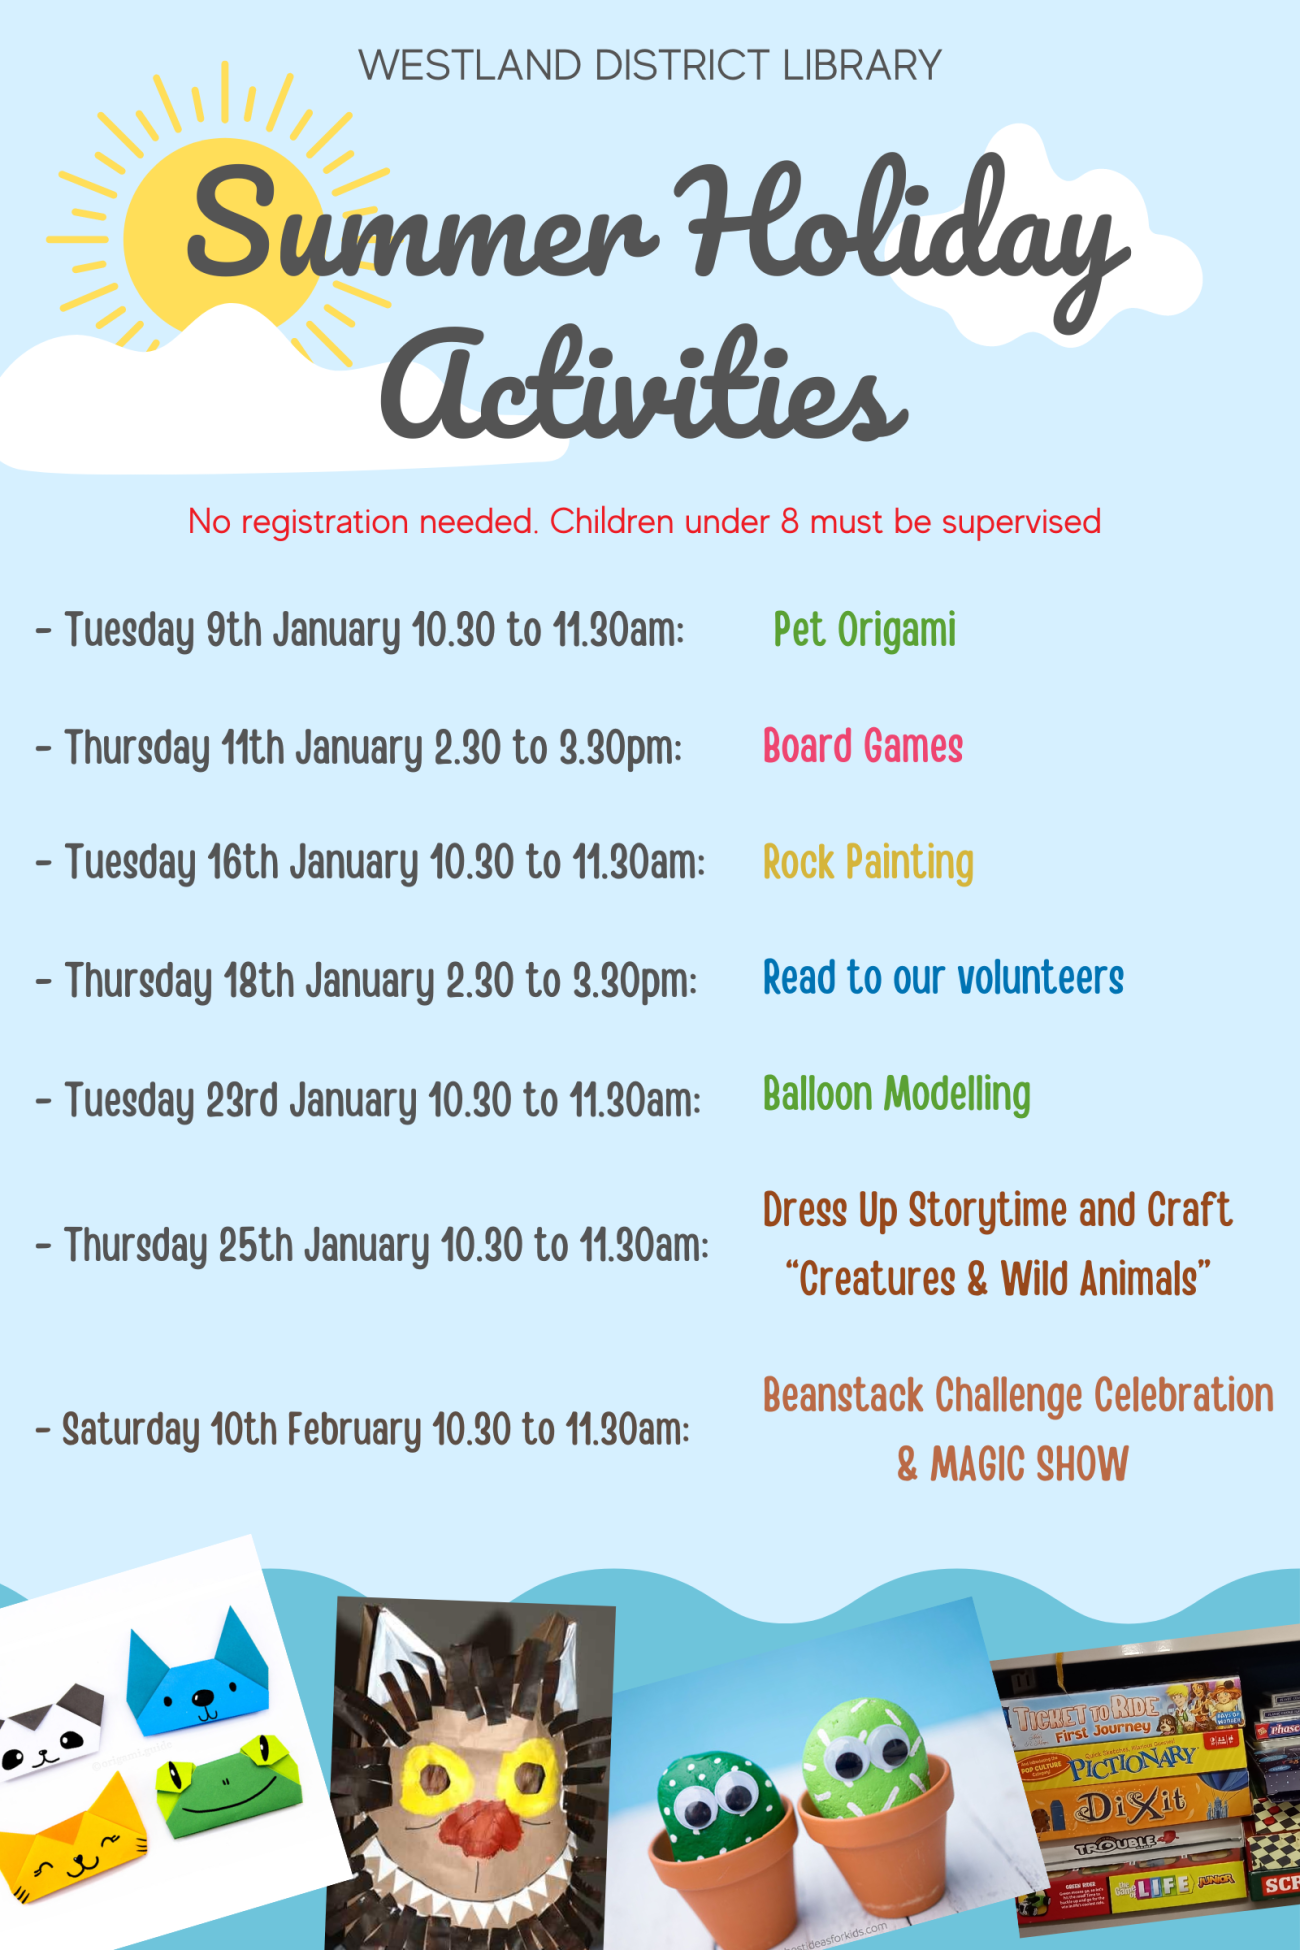 Summer Holiday activities at the Library